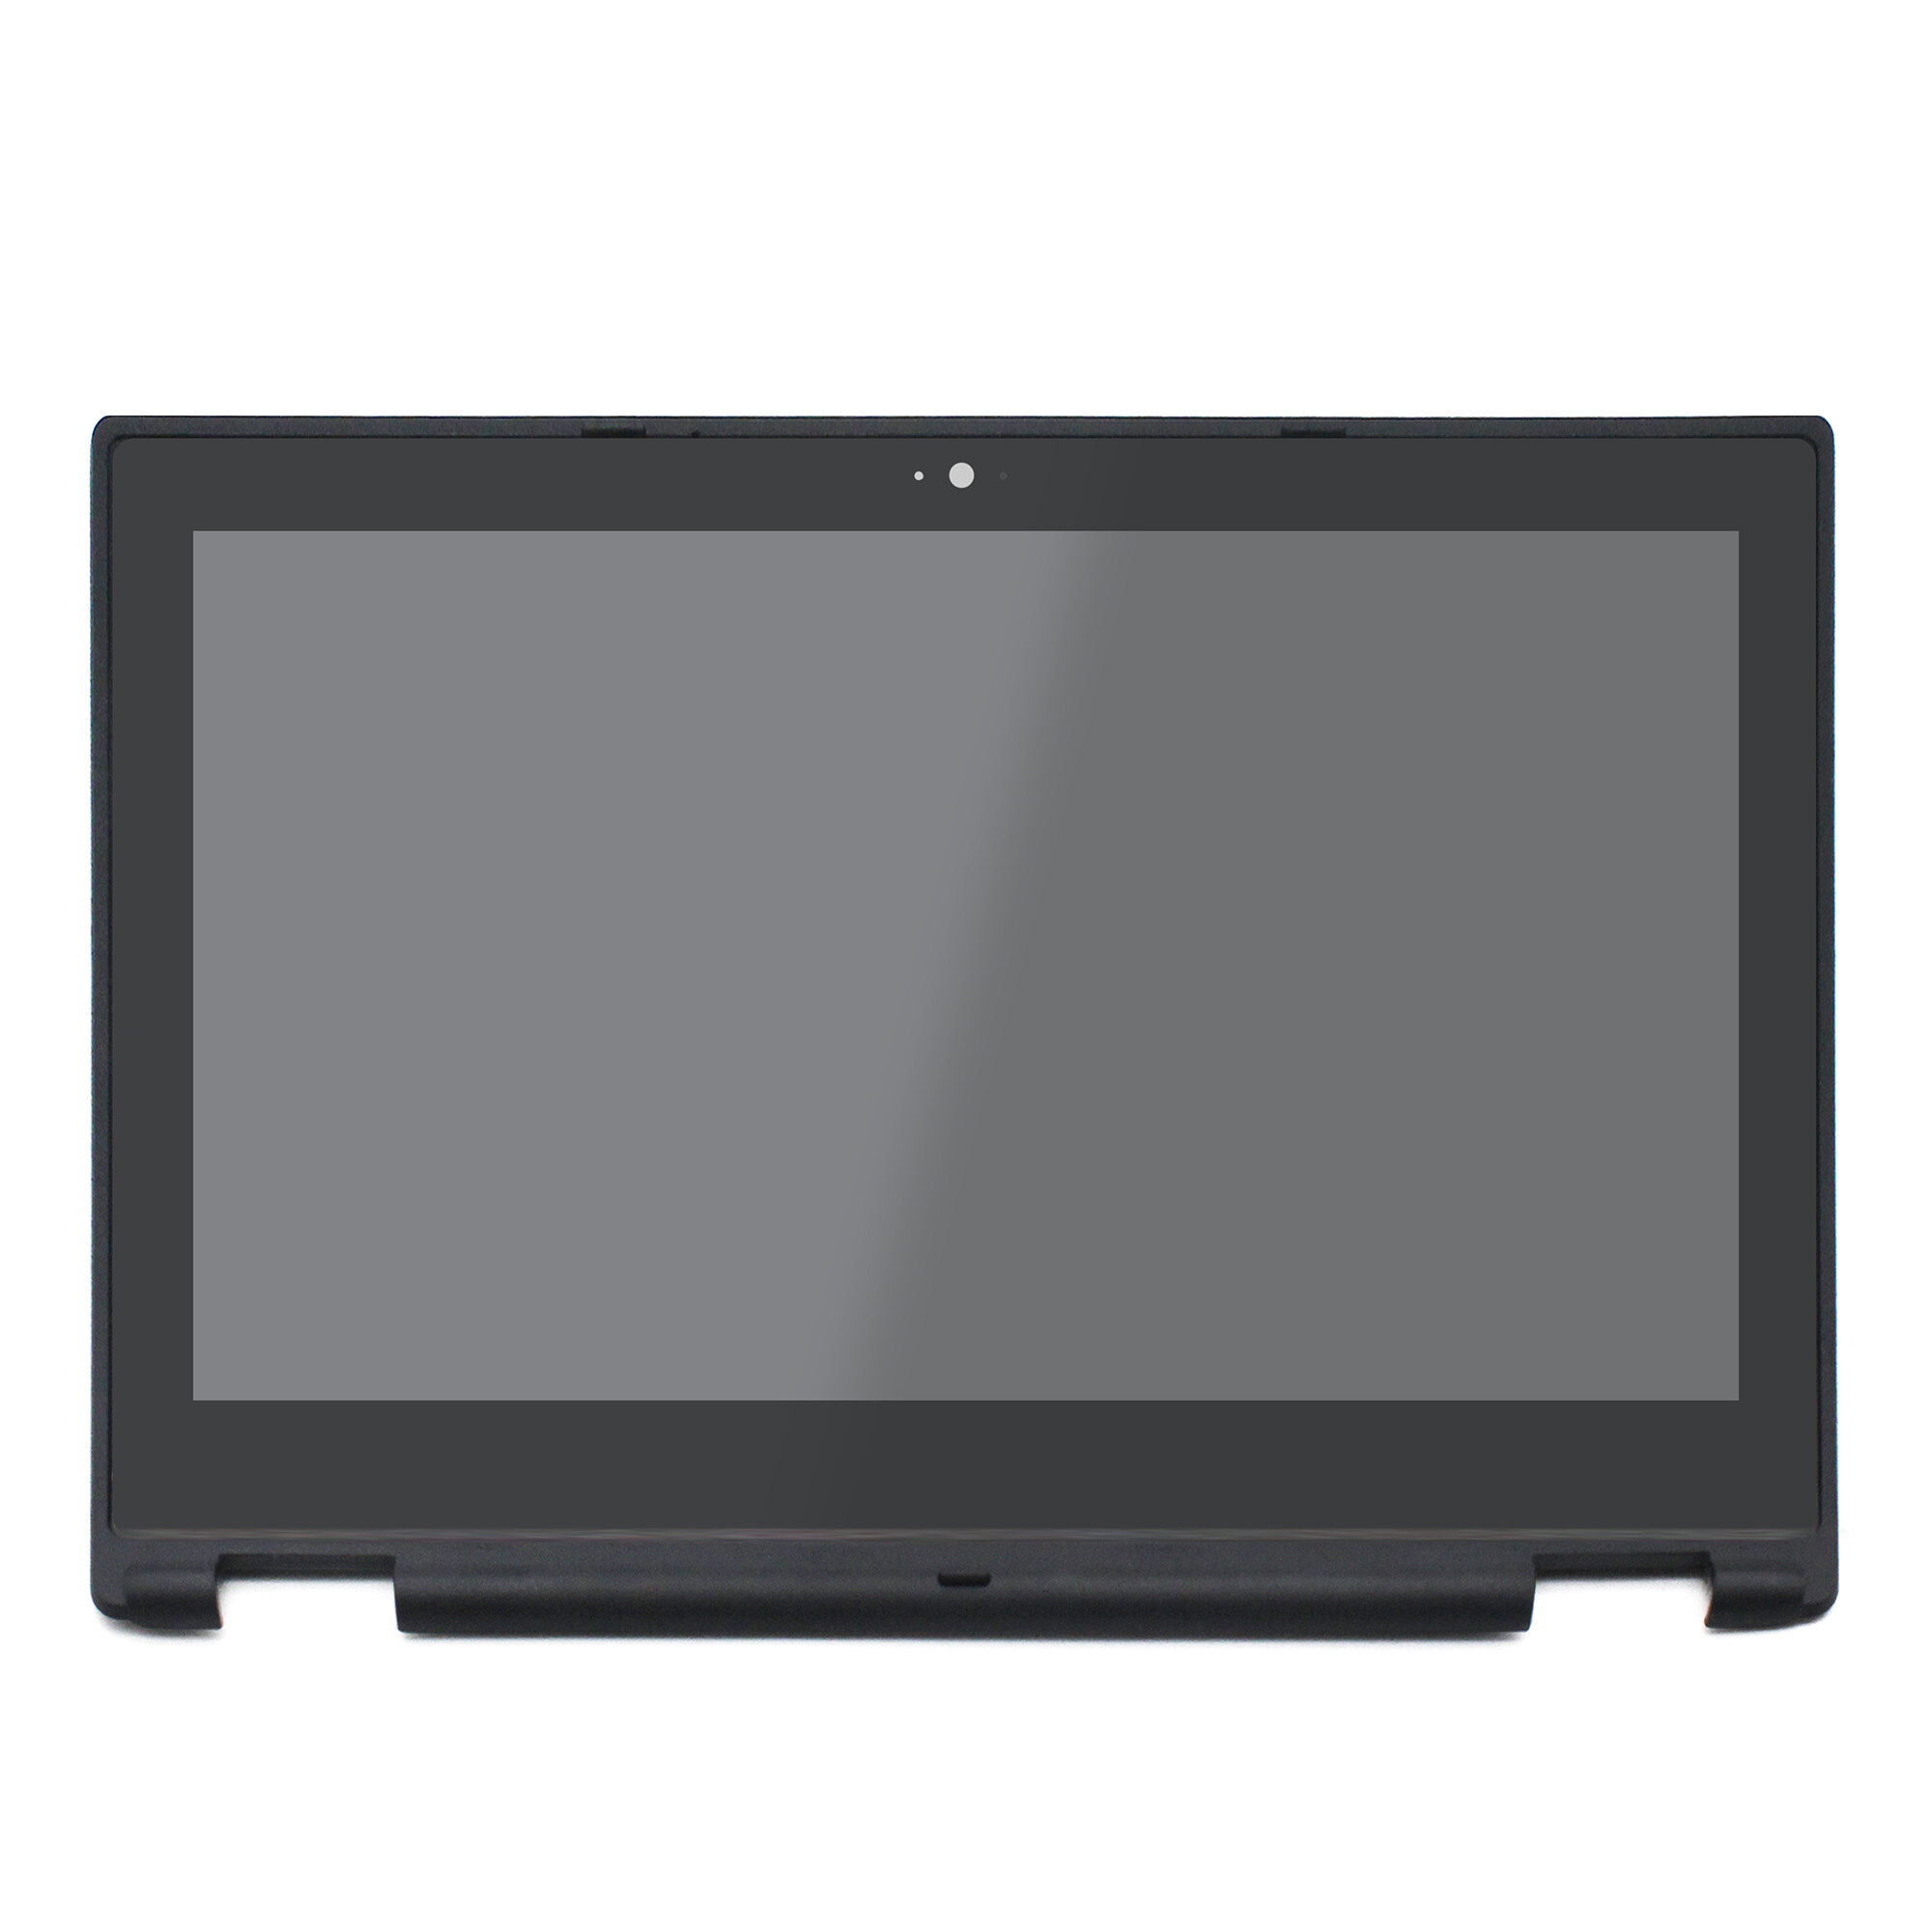 11.6" HD LED LCD Touchscreen Digitizer Assembly With Bezel for Acer Chromebook R11 CB5-132T-C4LB CB5-132T-C1LK CB5-132T N15Q8